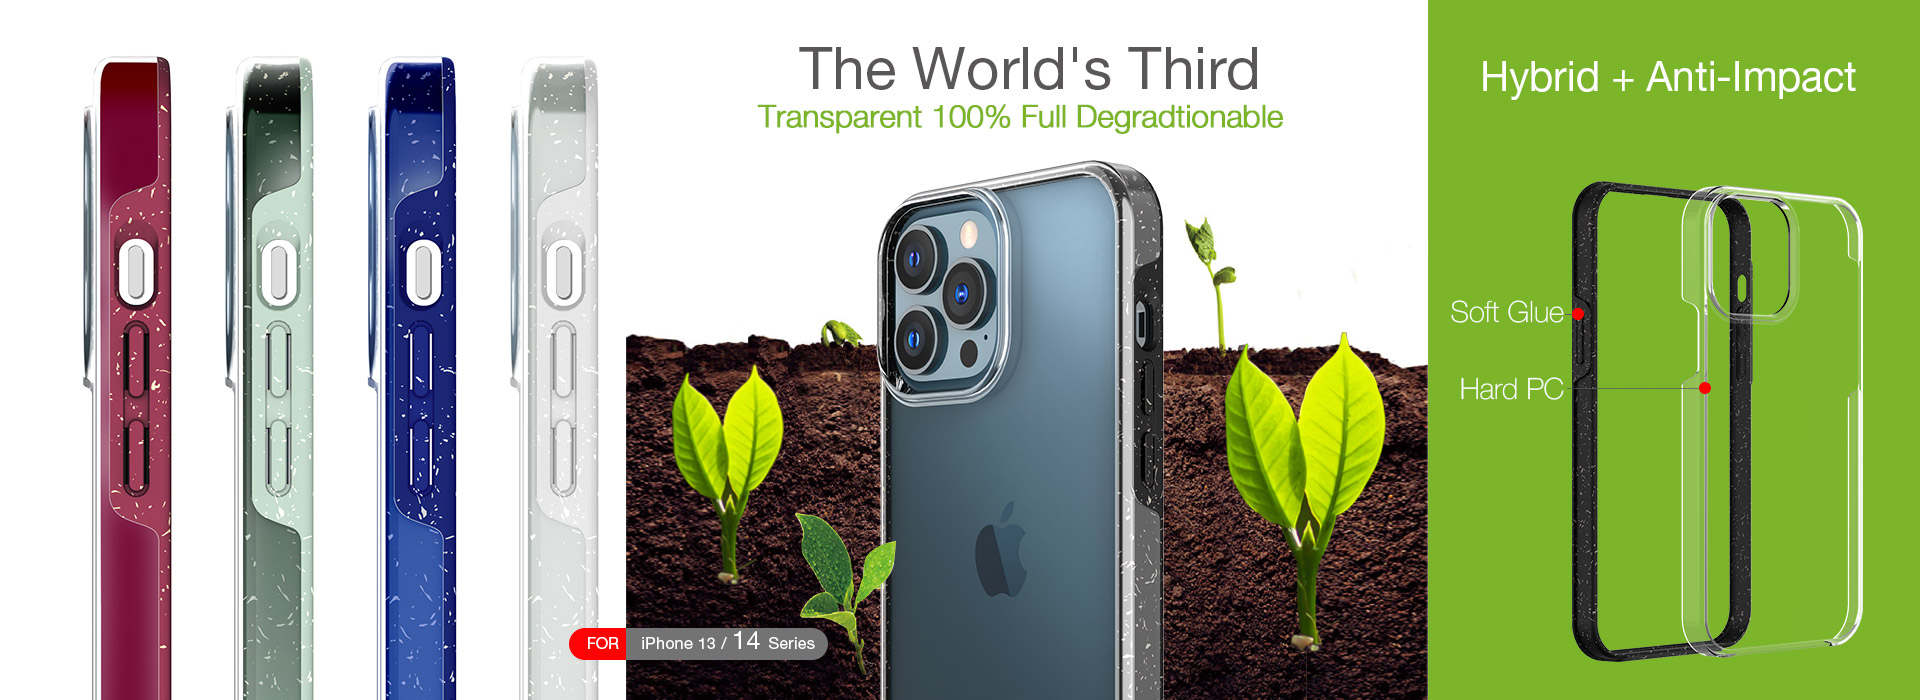 Fashionable Hybrid Transparent 100% biodegradable  Case For iPhone(Light Green)